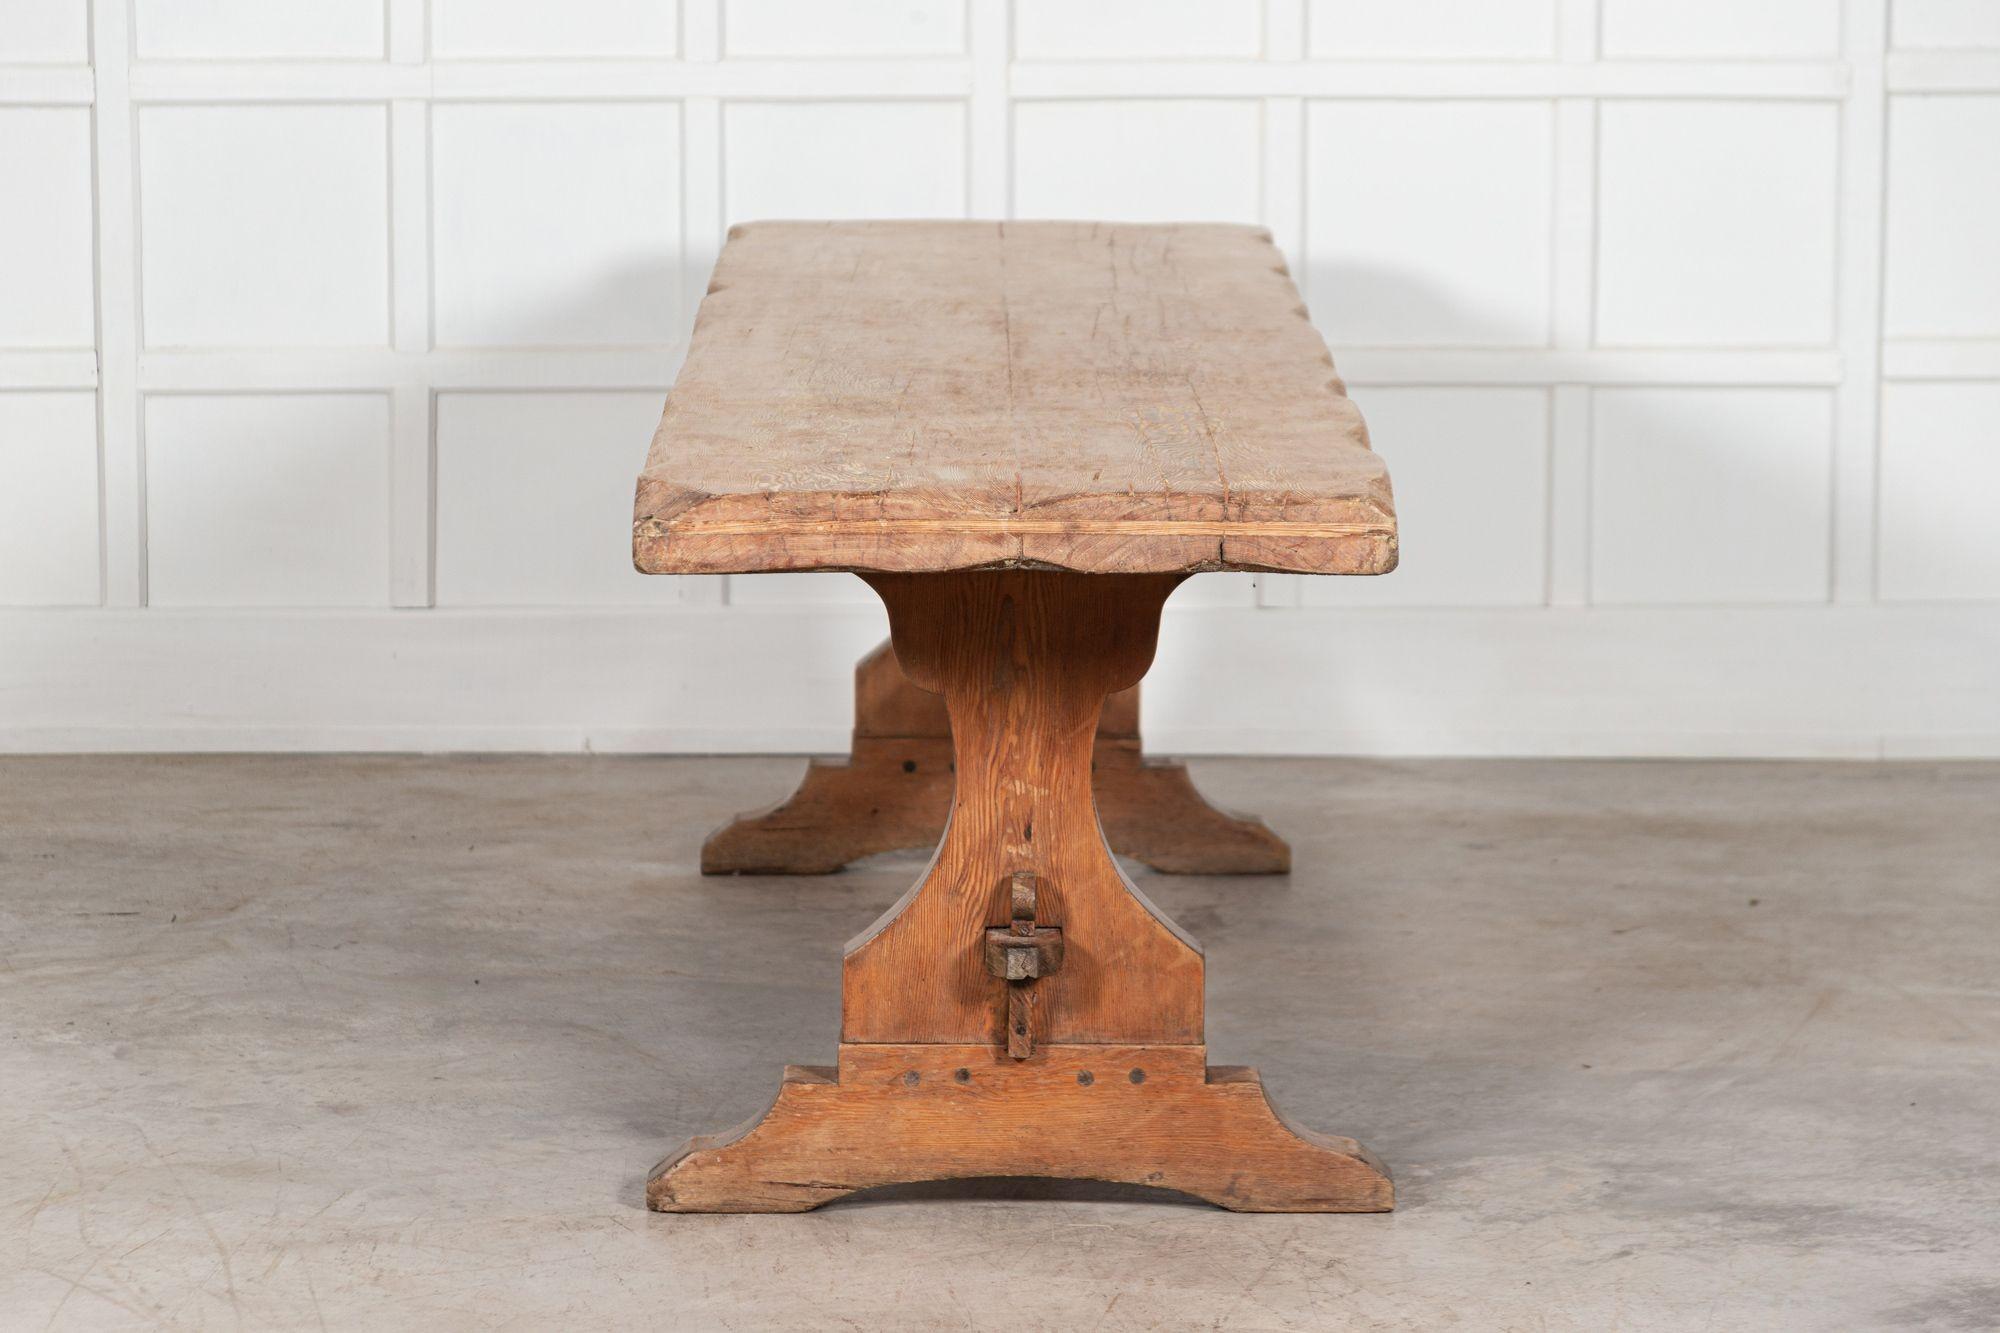 circa 1880
Monumental 19th century Scottish Estate Made Scrub Top Pine Refectory Table - 7cm Thick Two Plank Removeable Top
We can also customise existing pieces to suit your scheme/requirements. We have our own workshop, restorers and finishers.